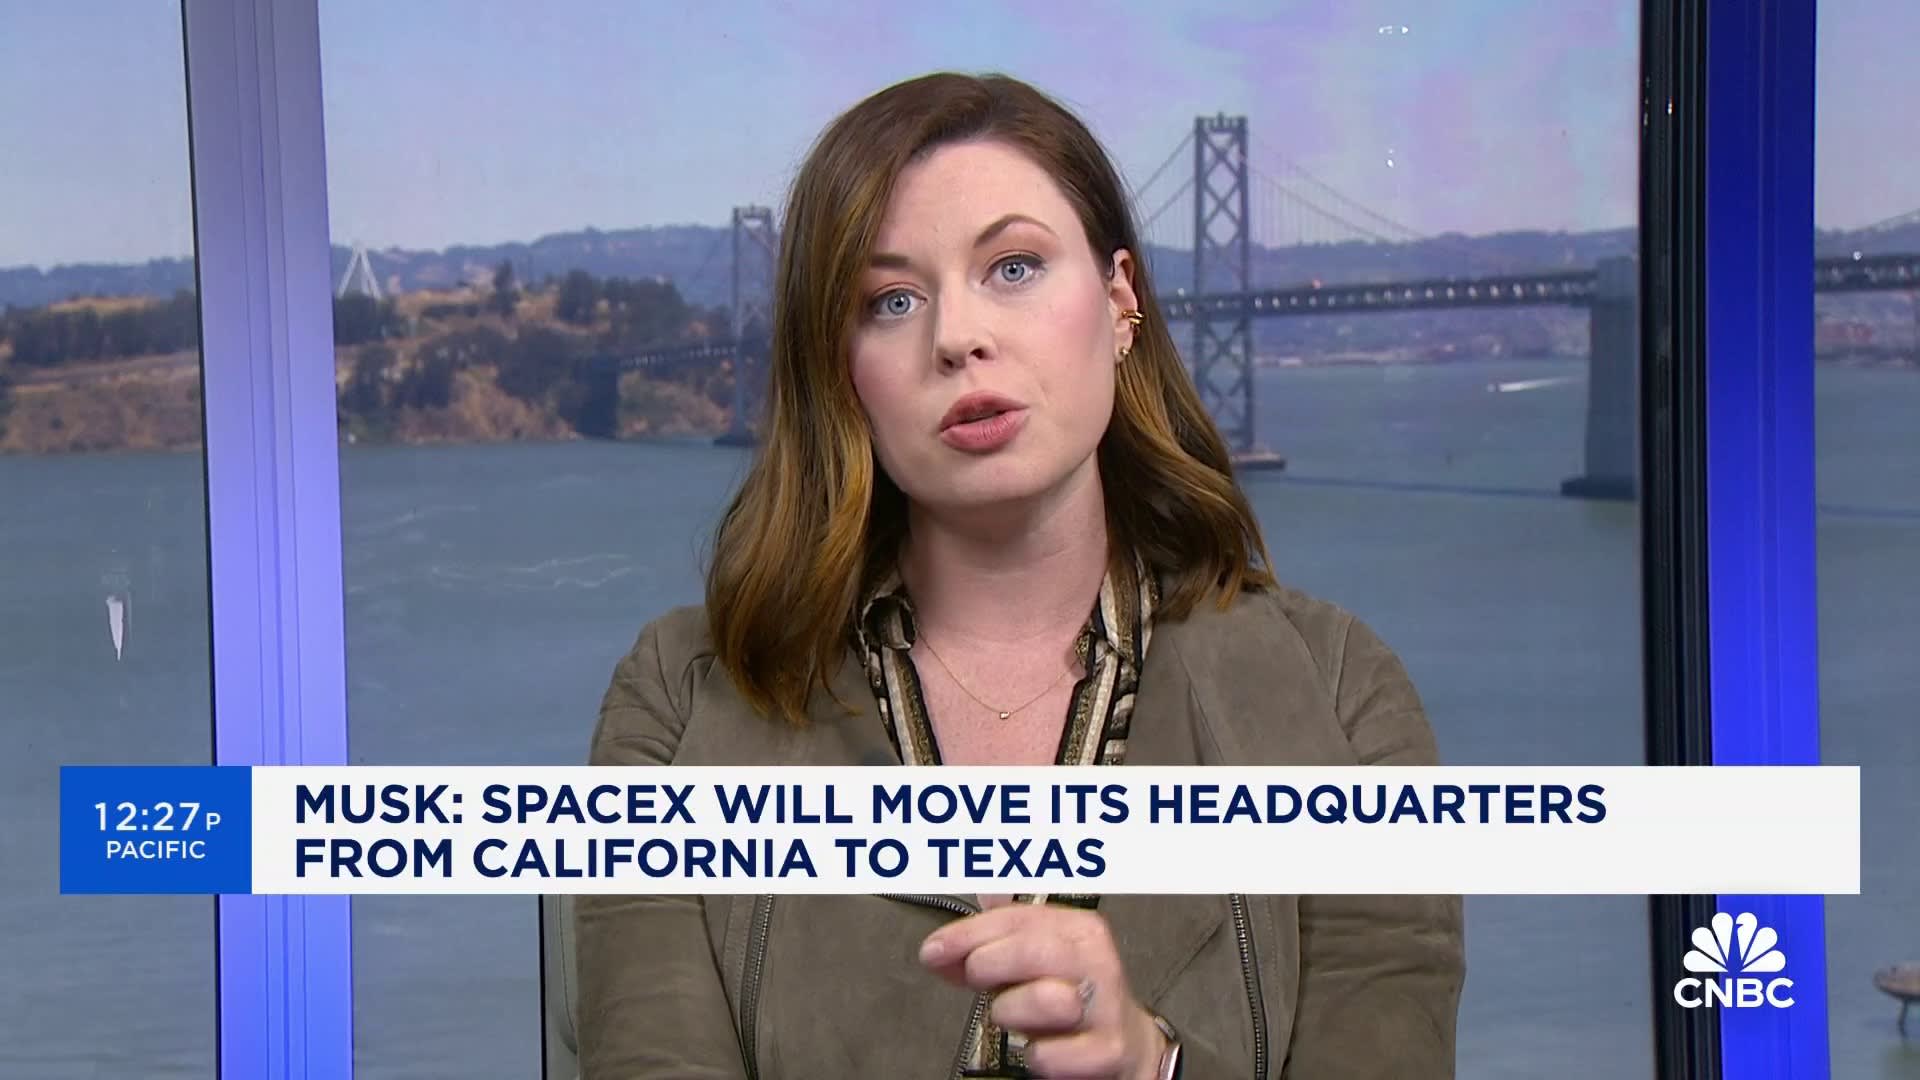 Elon Musk: SpaceX will move its headquarters from California to Texas